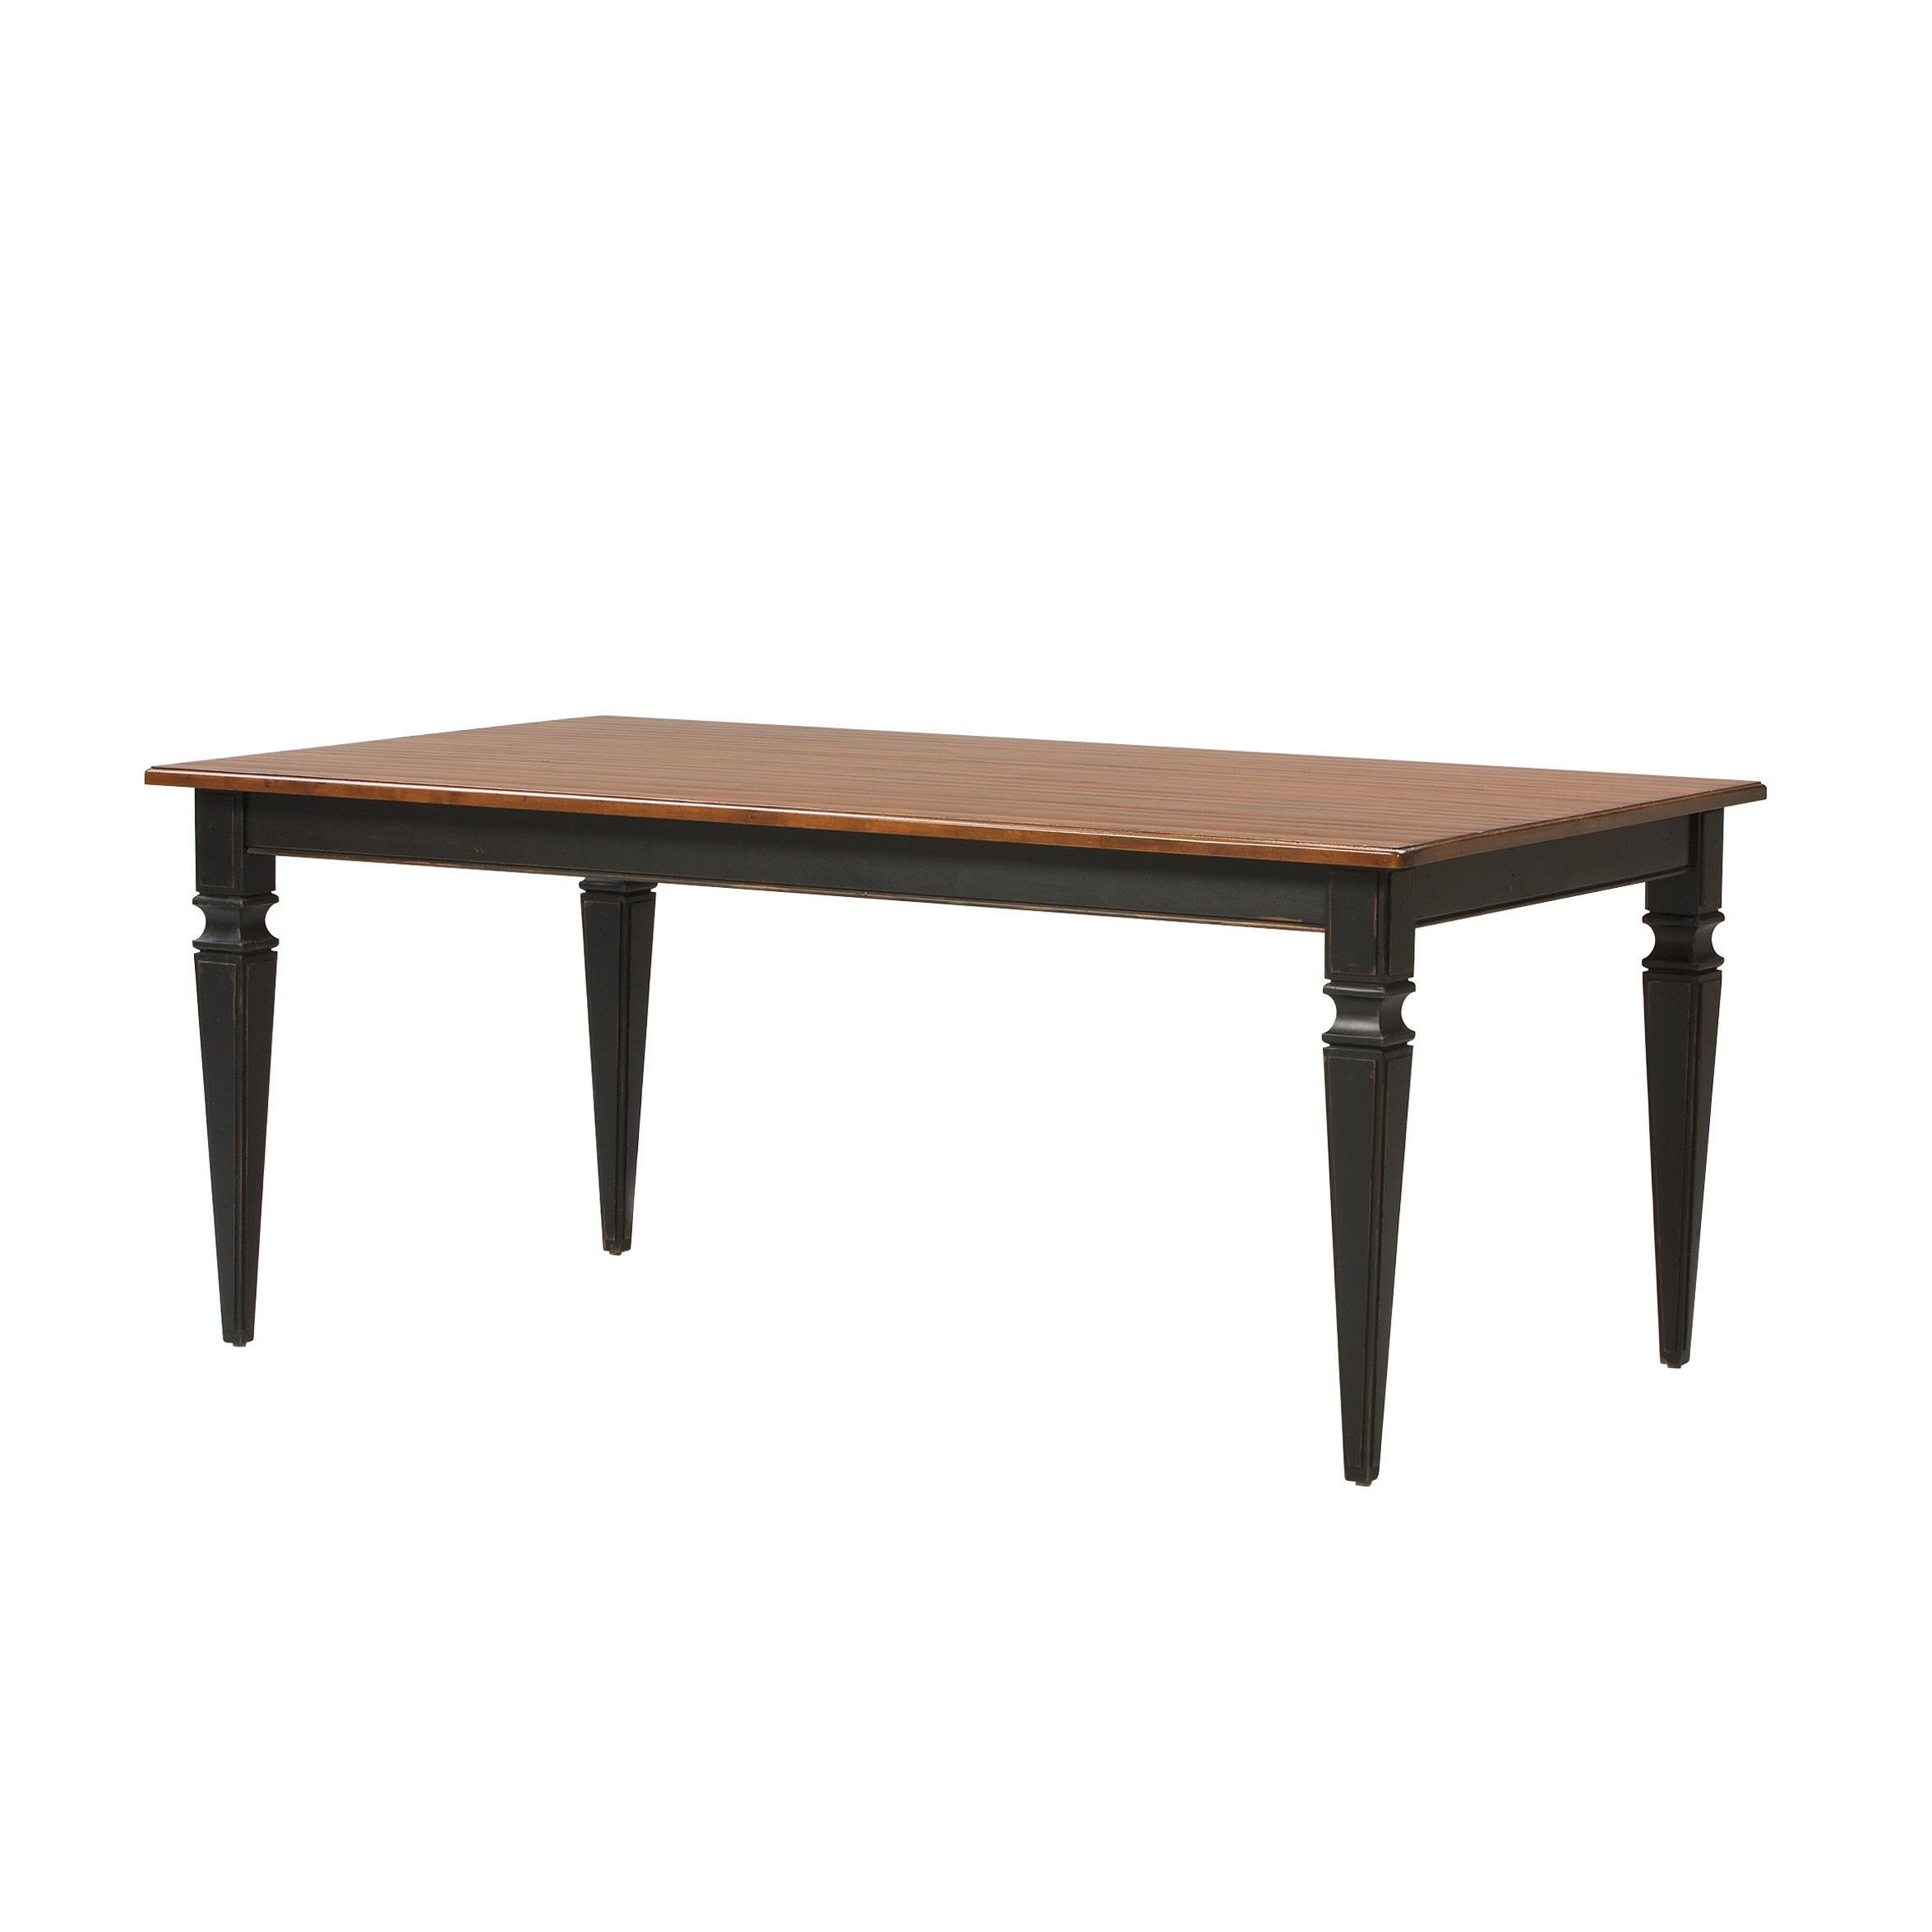 Large Avery Wavy Top Dining Table – Ethan Allen Us $1279 With 2020 Avery Rectangular Dining Tables (View 4 of 25)